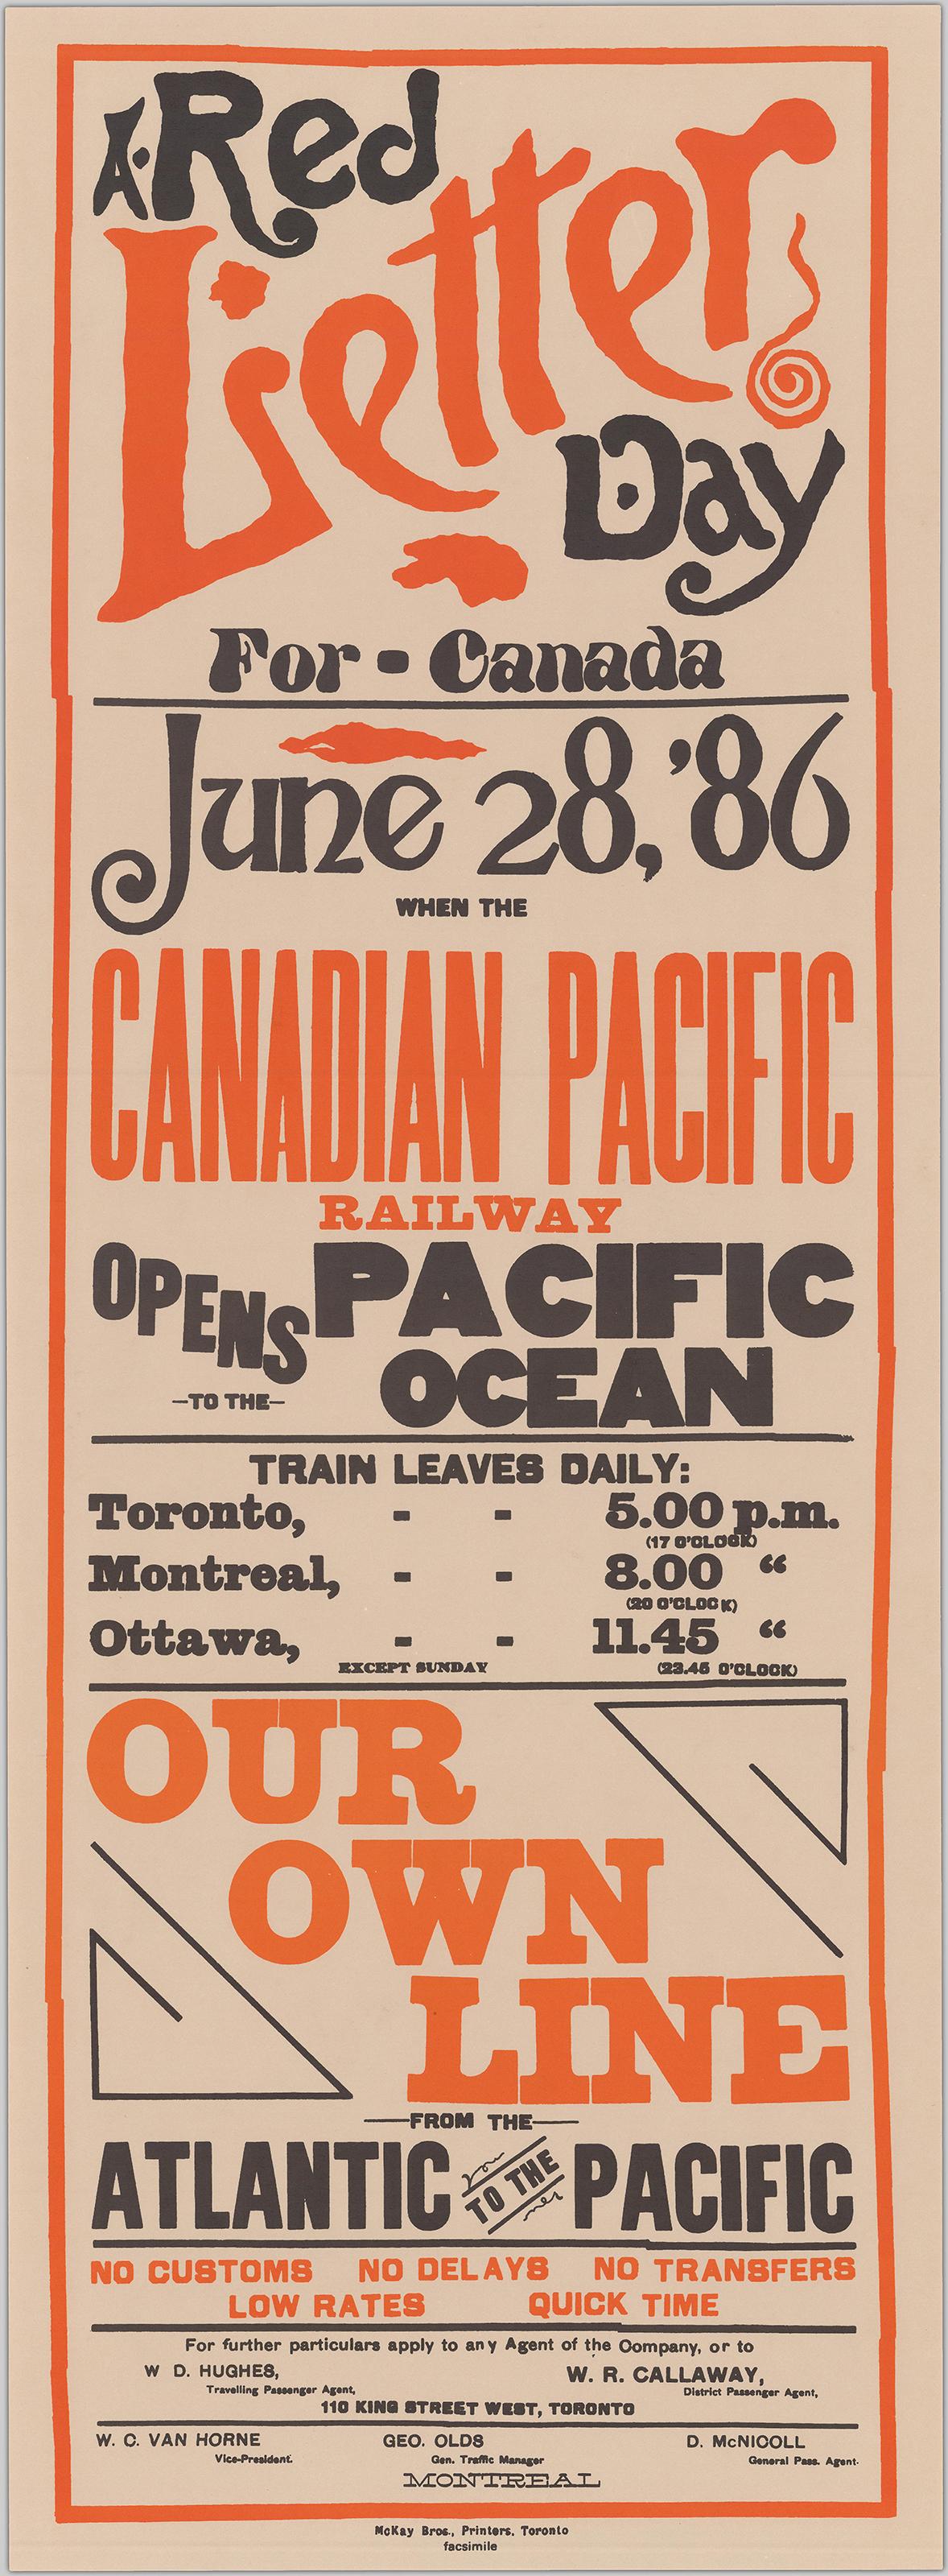 Red letter day for Canada : June 28, '86